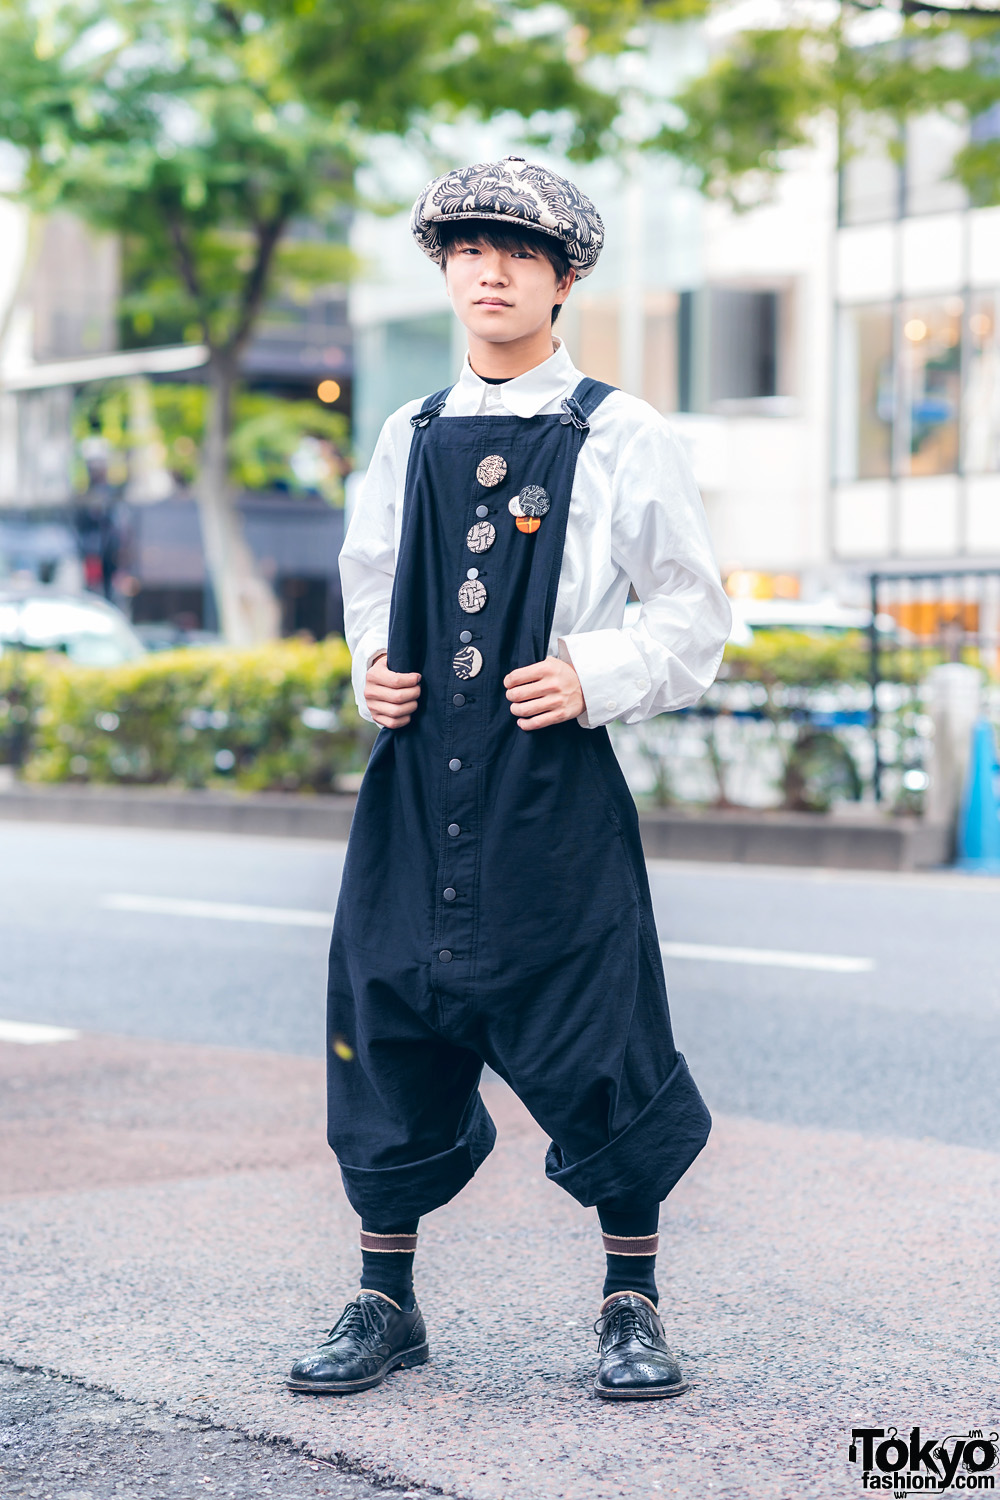 Christopher Nemeth Streetwear Style w/ Newsboy Cap, Rope Print Badges,  White Shirt, Drop Crotch Overalls & Leather Wingtip Shoes – Tokyo Fashion